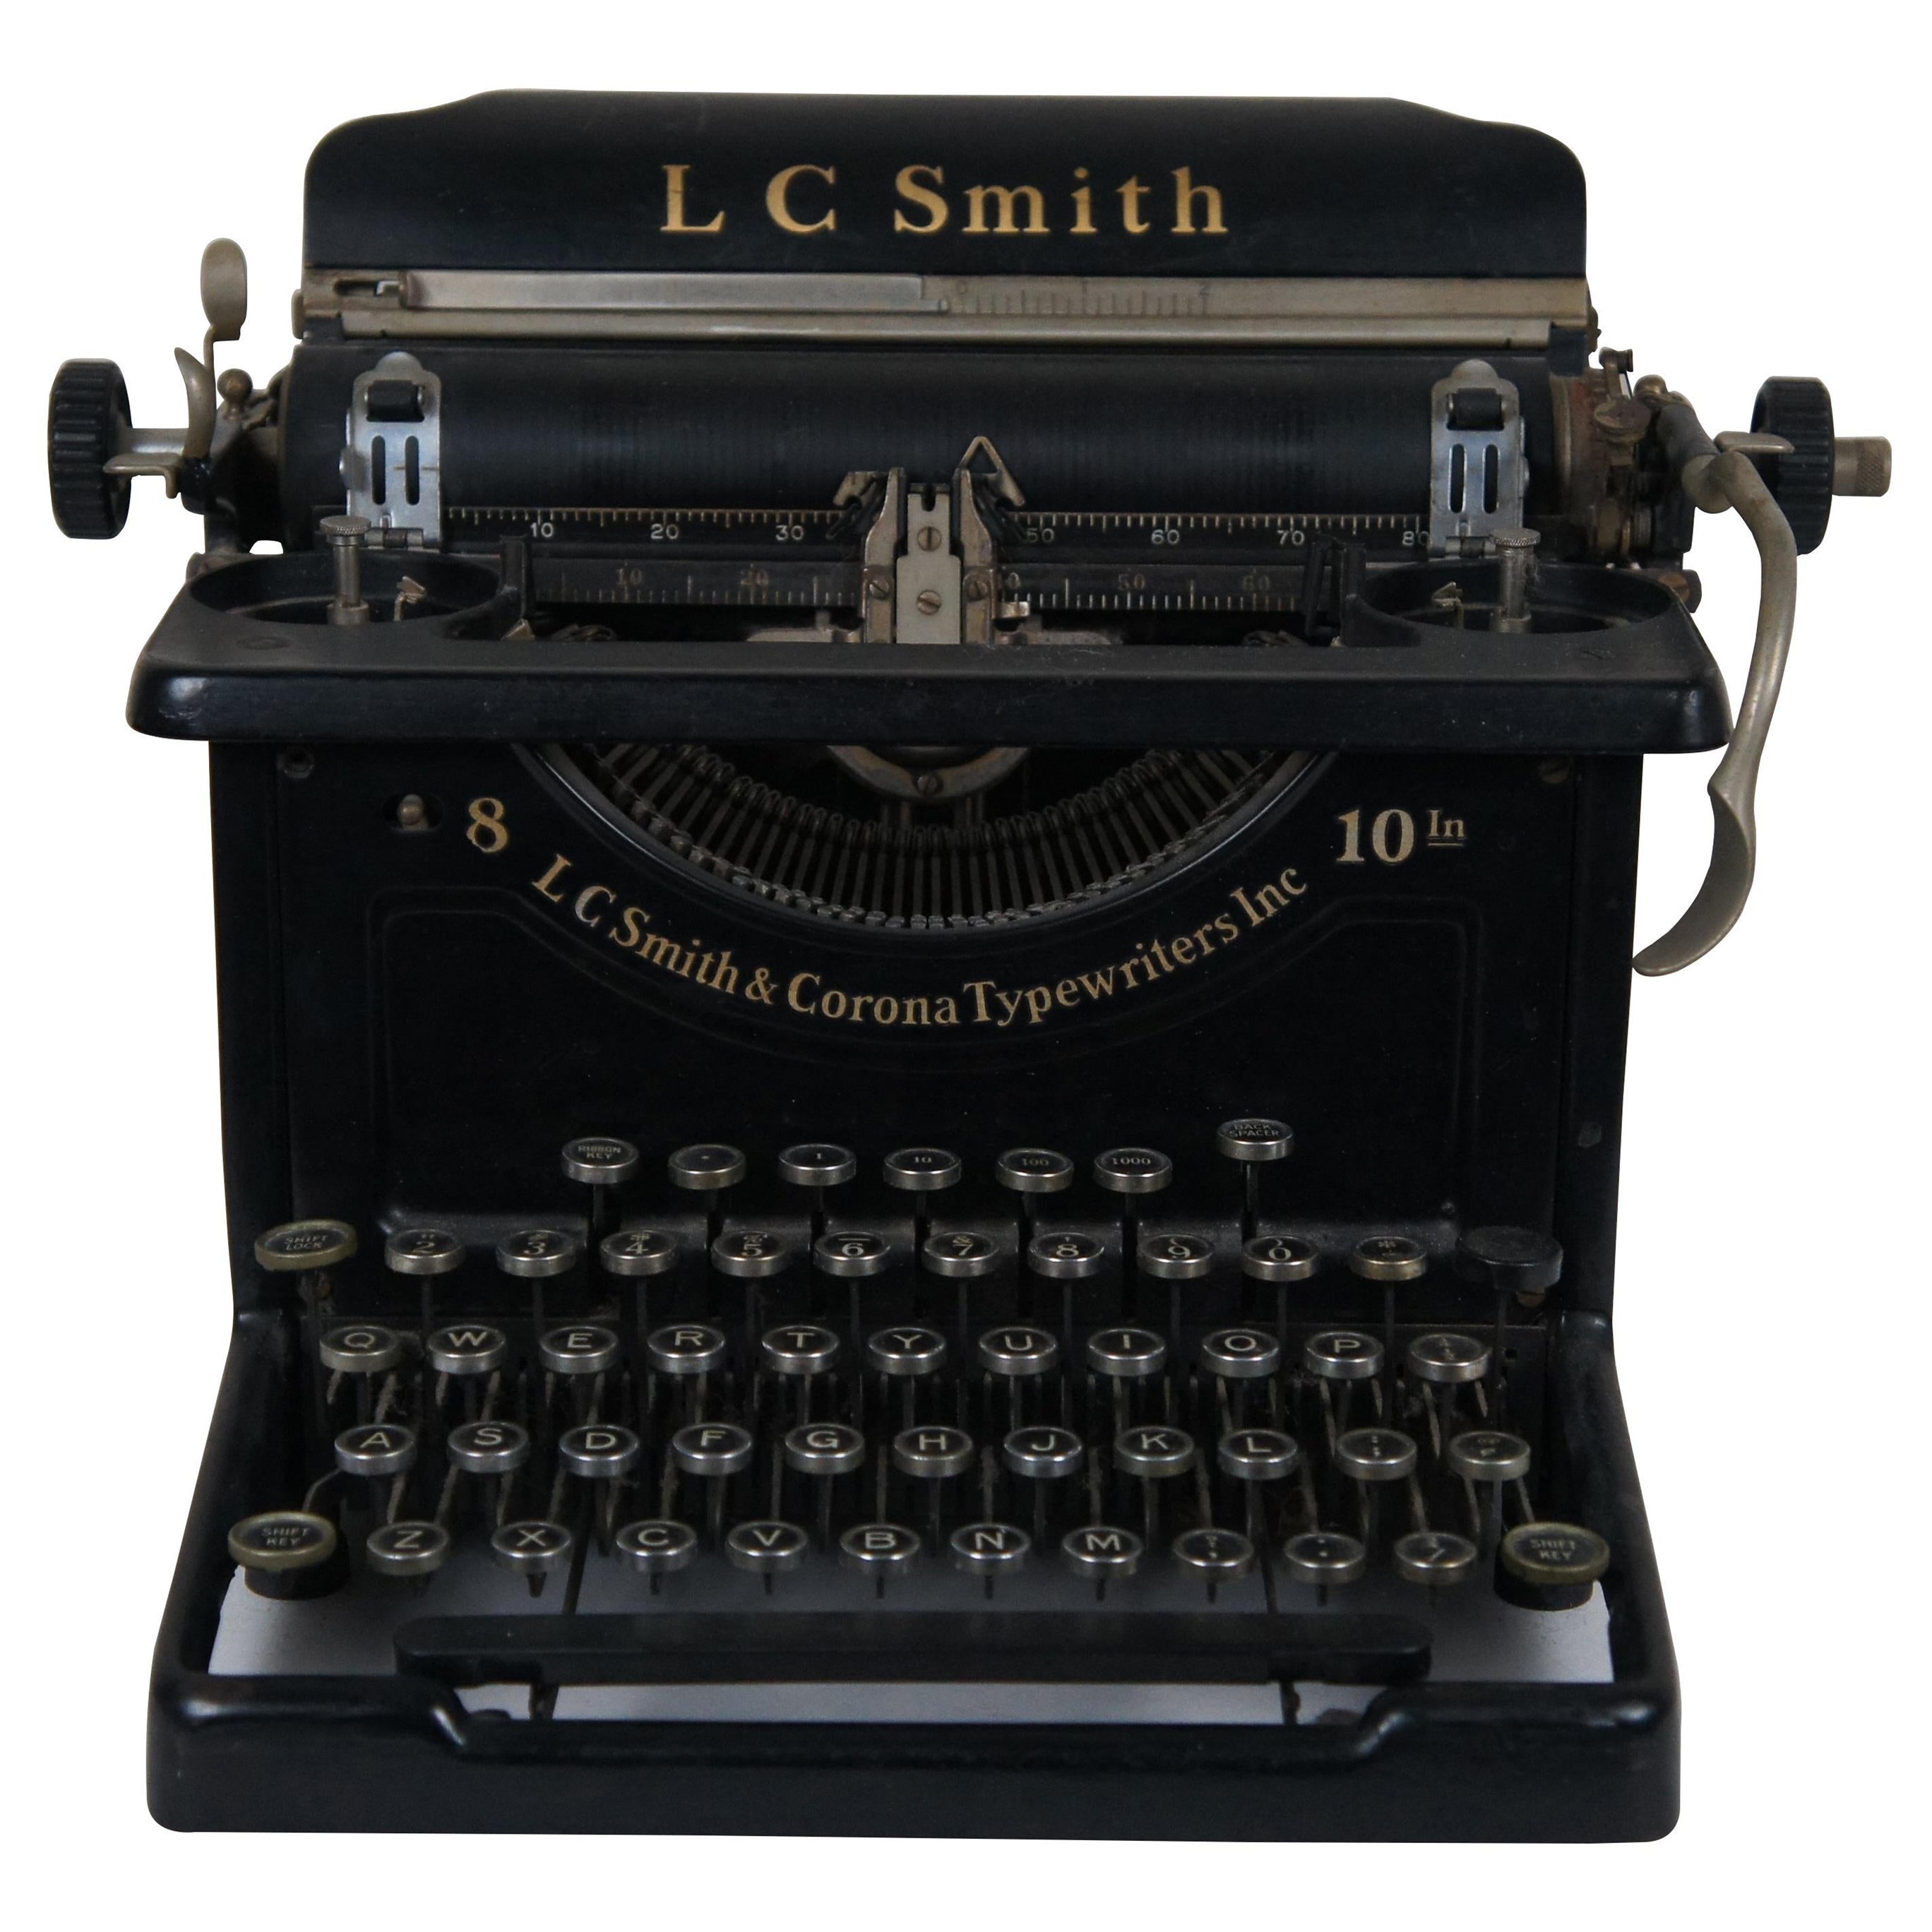 Antique 1930 LC Smith & Corona Standard & Silent No 8 Typewriter 15" For Sale